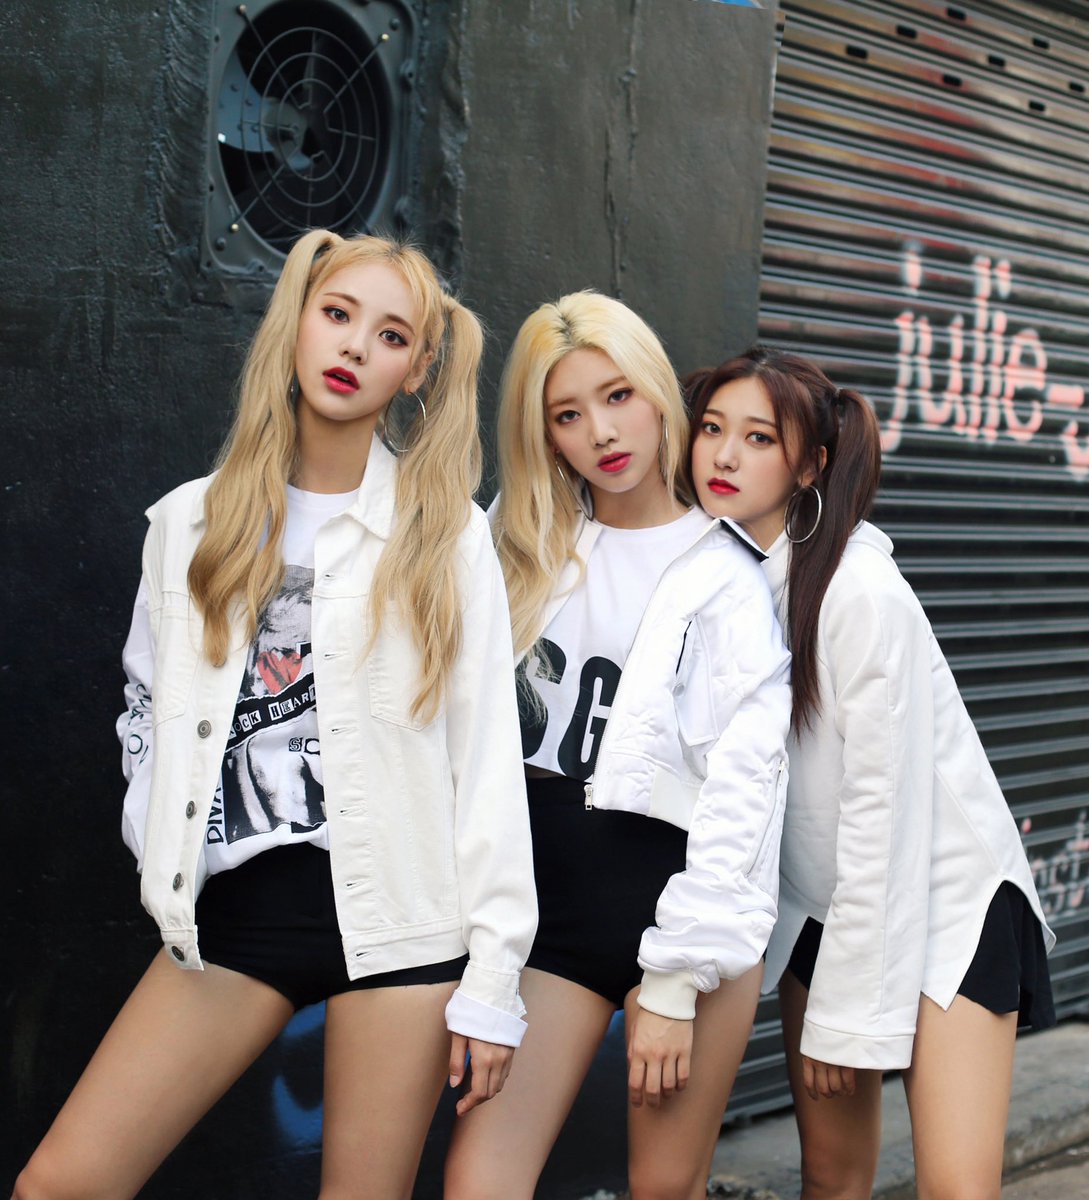 Odd Eye Circle, consisting of LOONA’s Kim Lip, Jinsoul & Choerry, will reportedly make a comeback with an album in July.